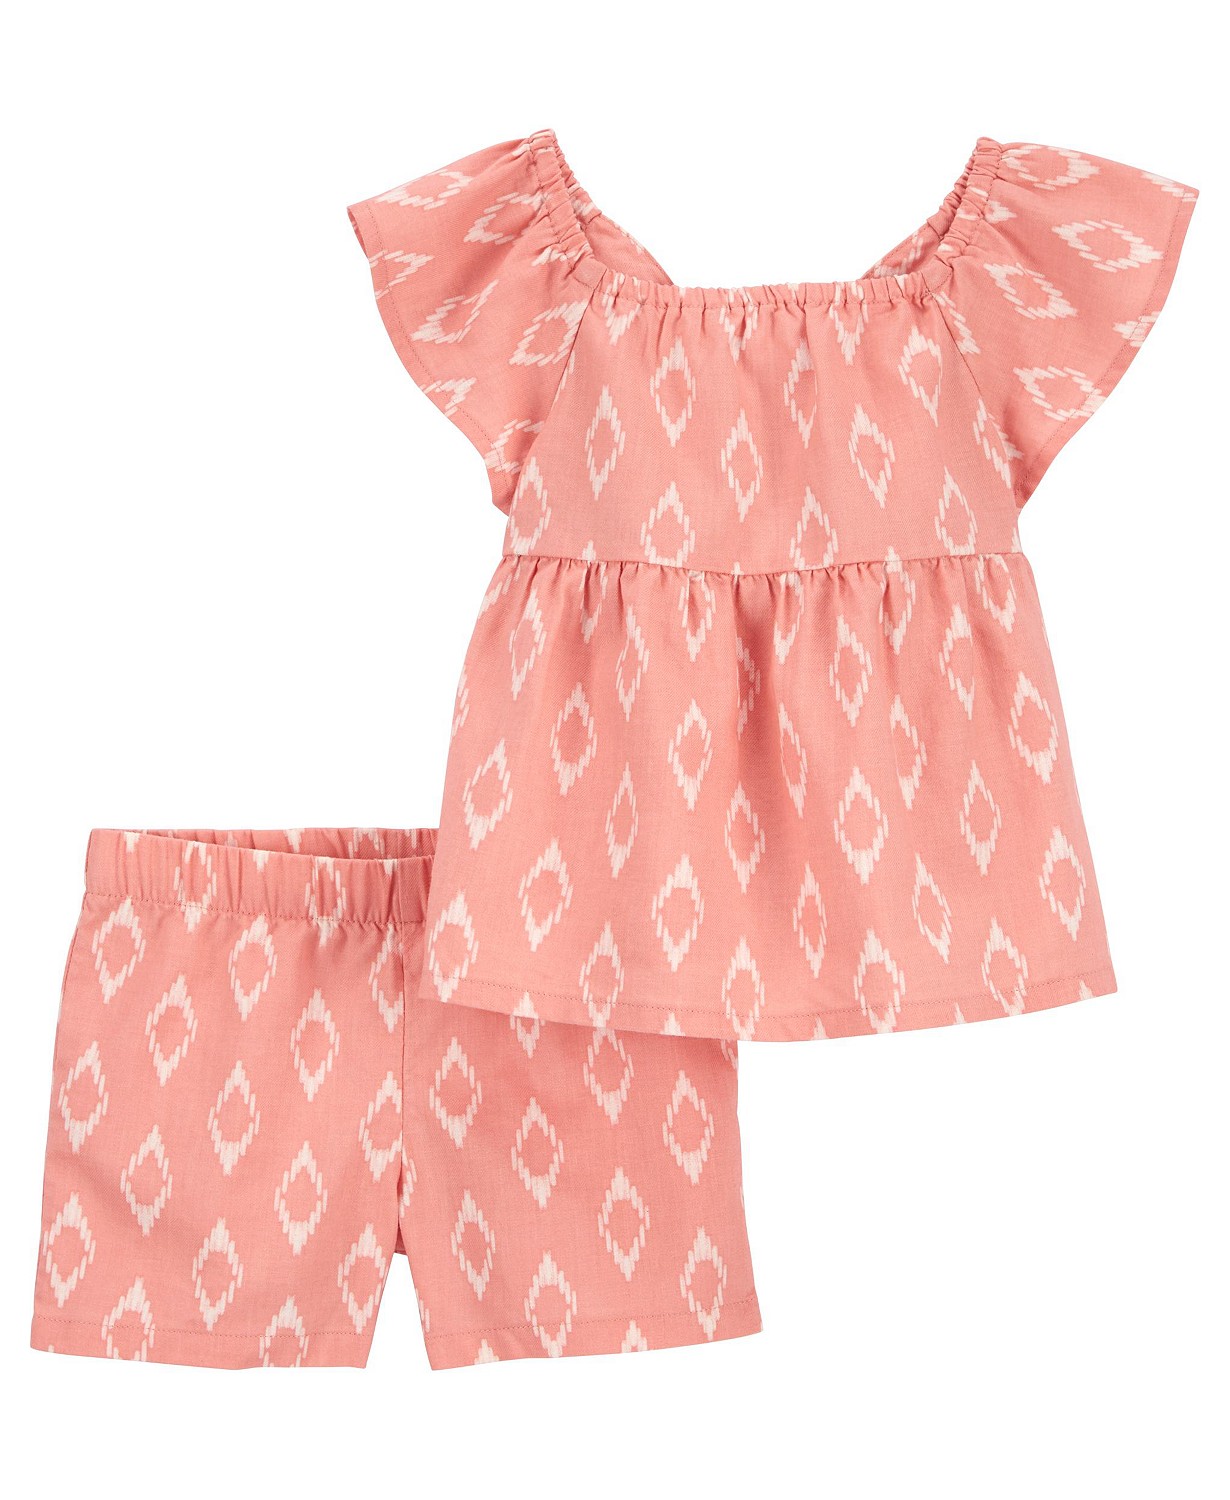 Baby Girls Linen Top and Shorts 2 Piece Set